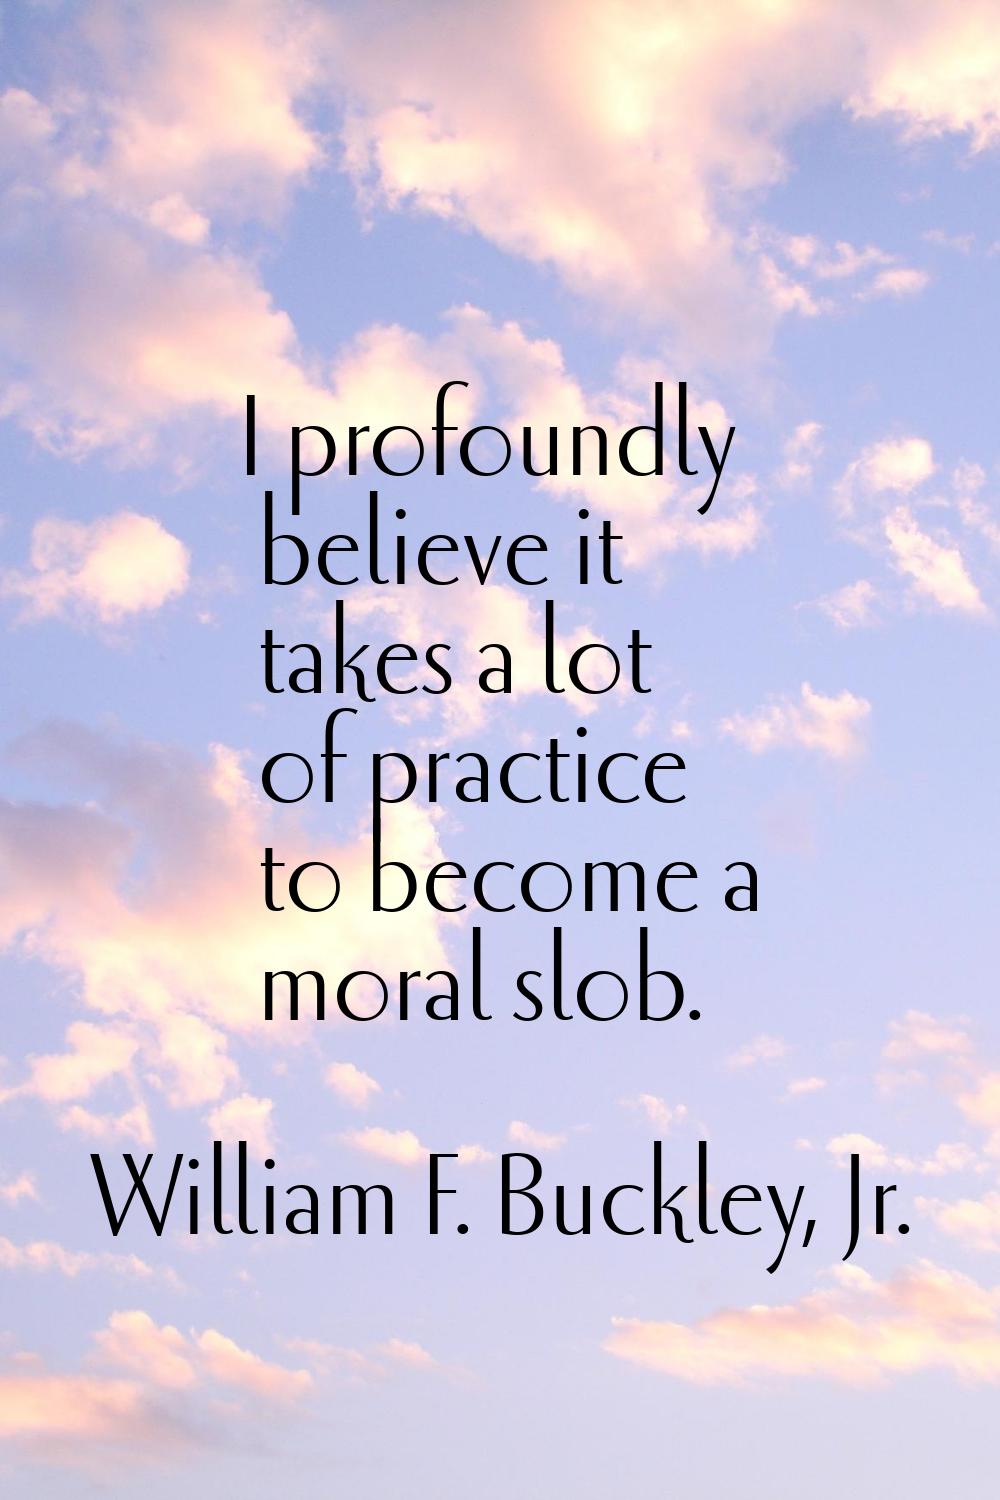 I profoundly believe it takes a lot of practice to become a moral slob.